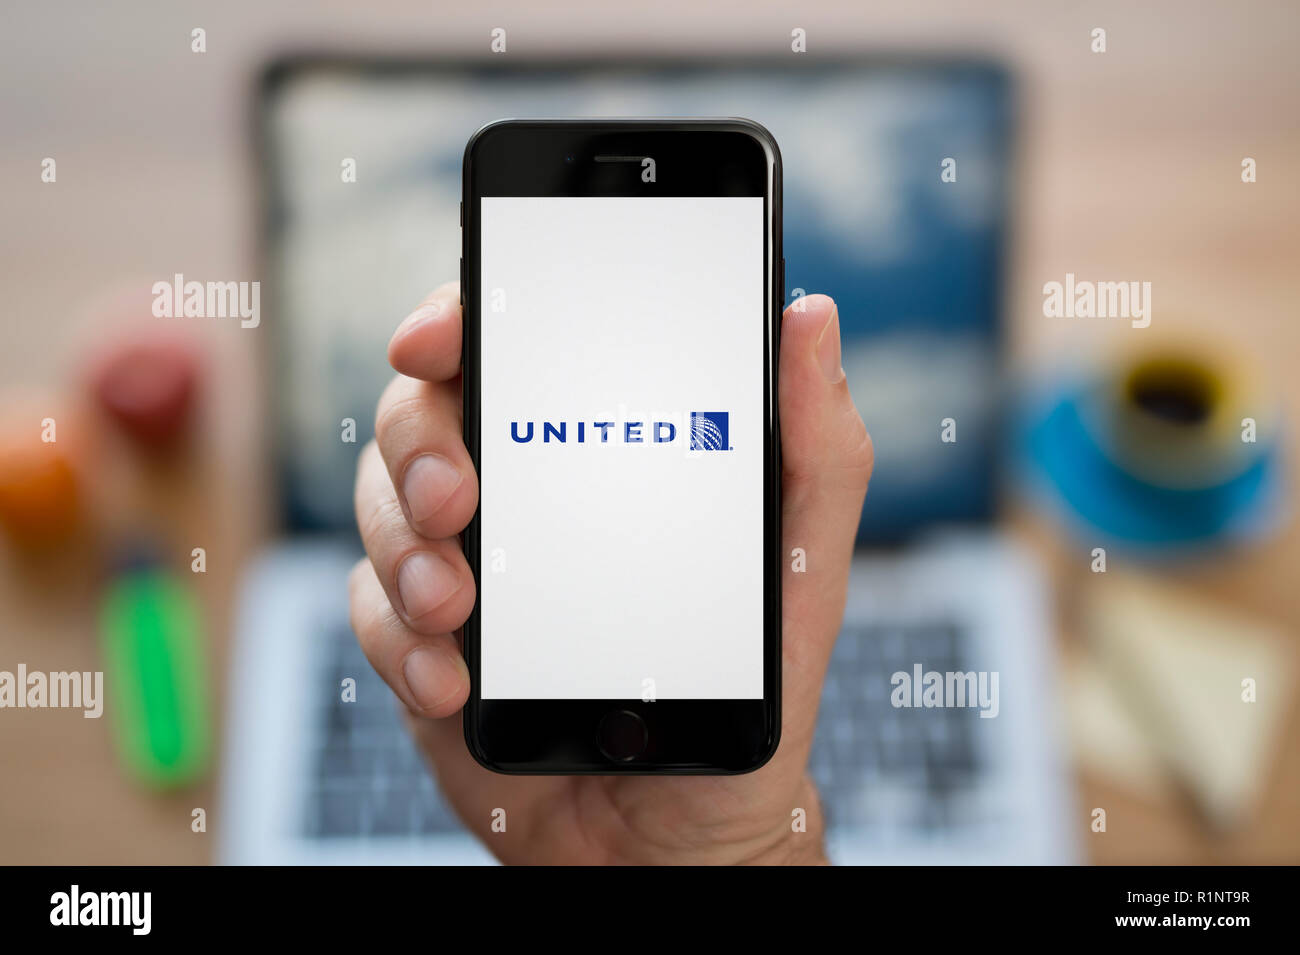 A man looks at his iPhone which displays the United Airlines logo, while sat at his computer desk (Editorial use only). Stock Photo